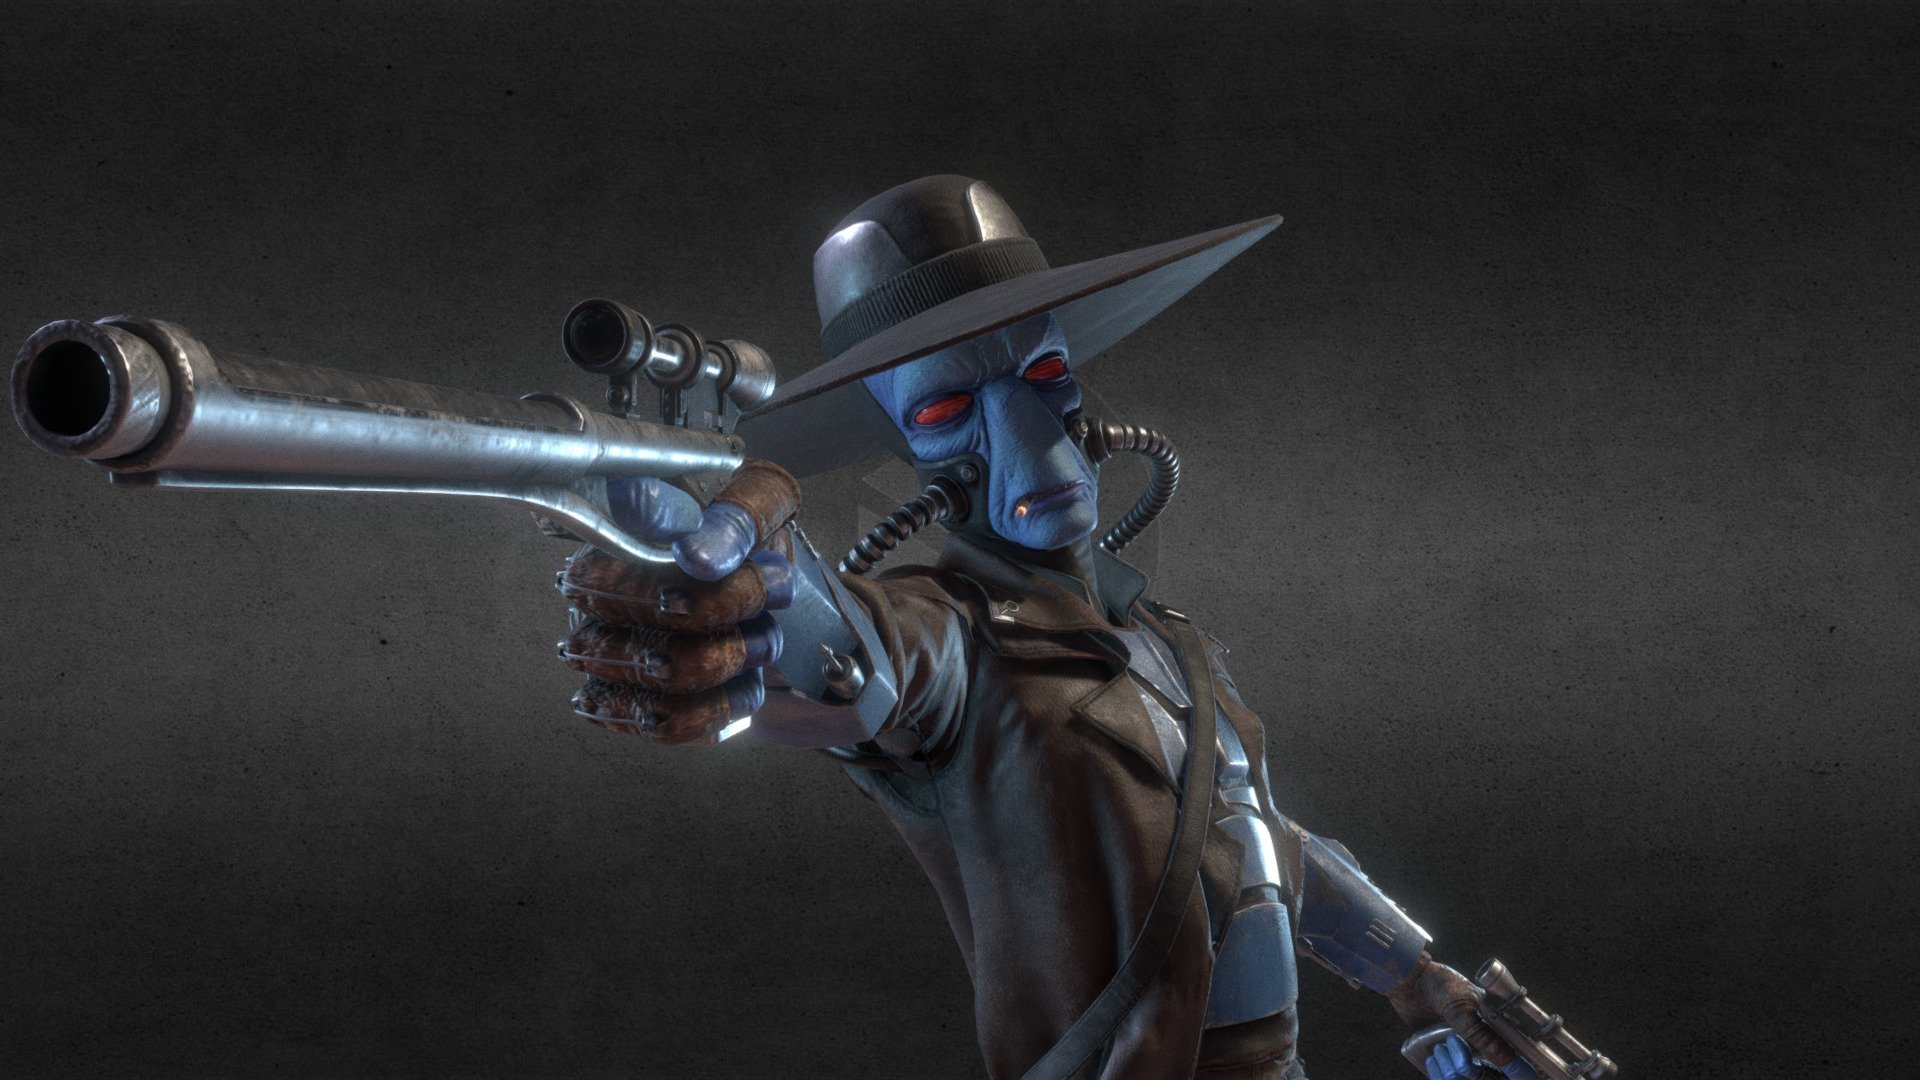 Cad Bane: 6 Incredible Facts About